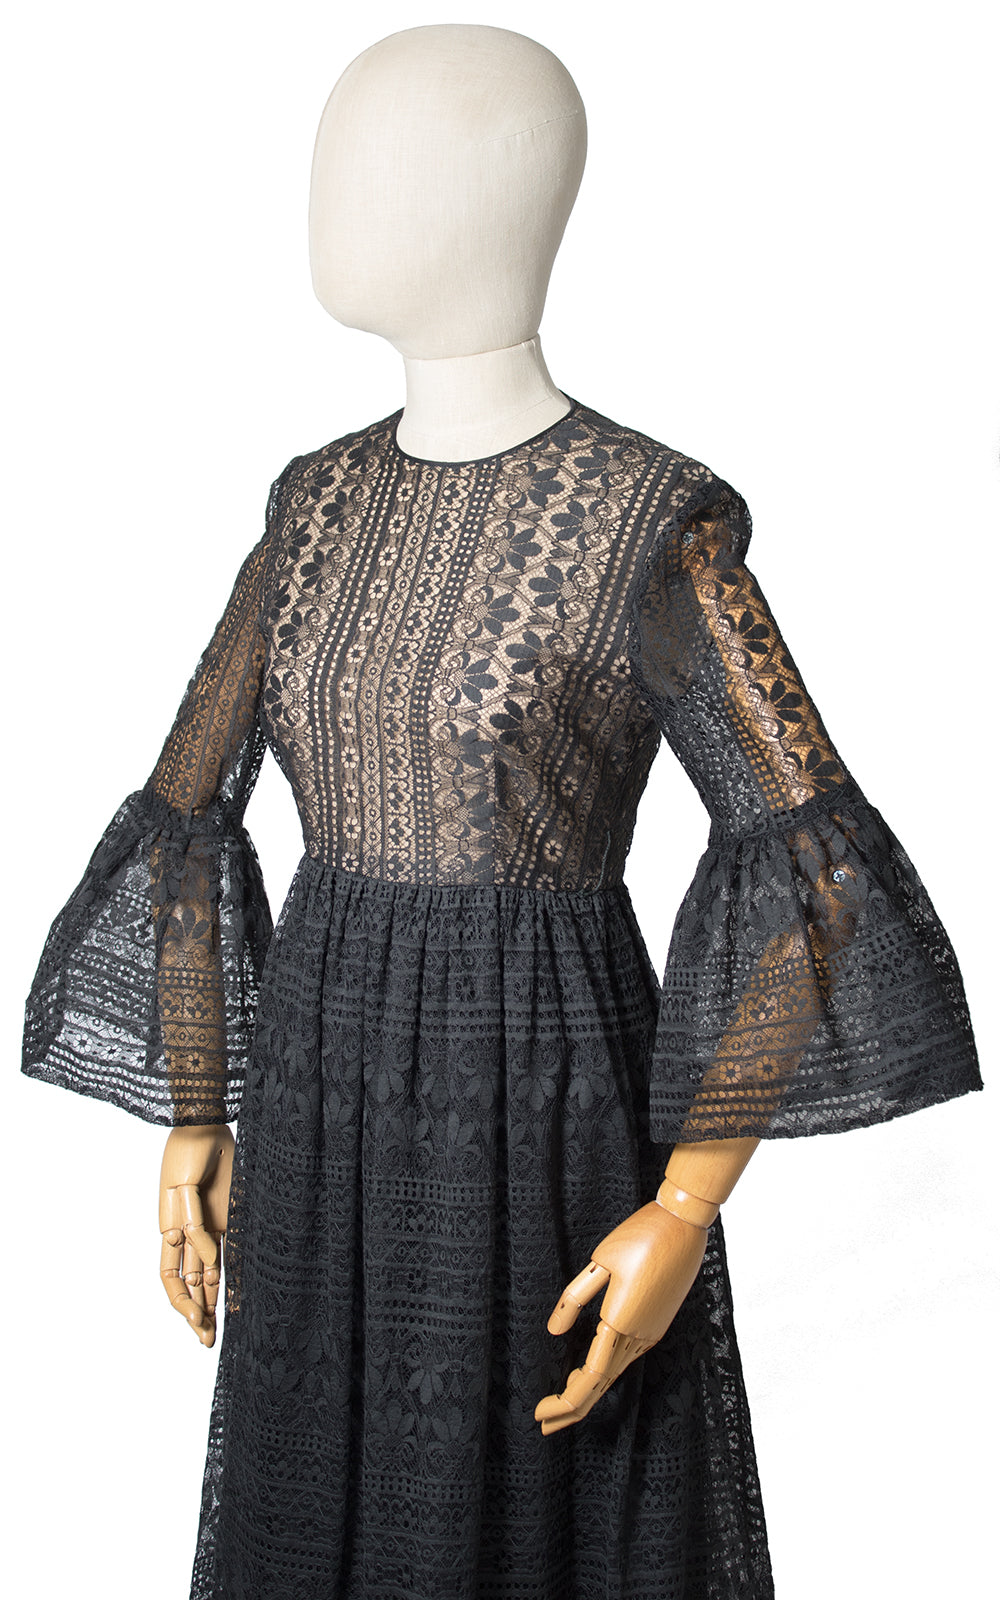 1960s Nude Illusion Lace Bell Sleeve Dress